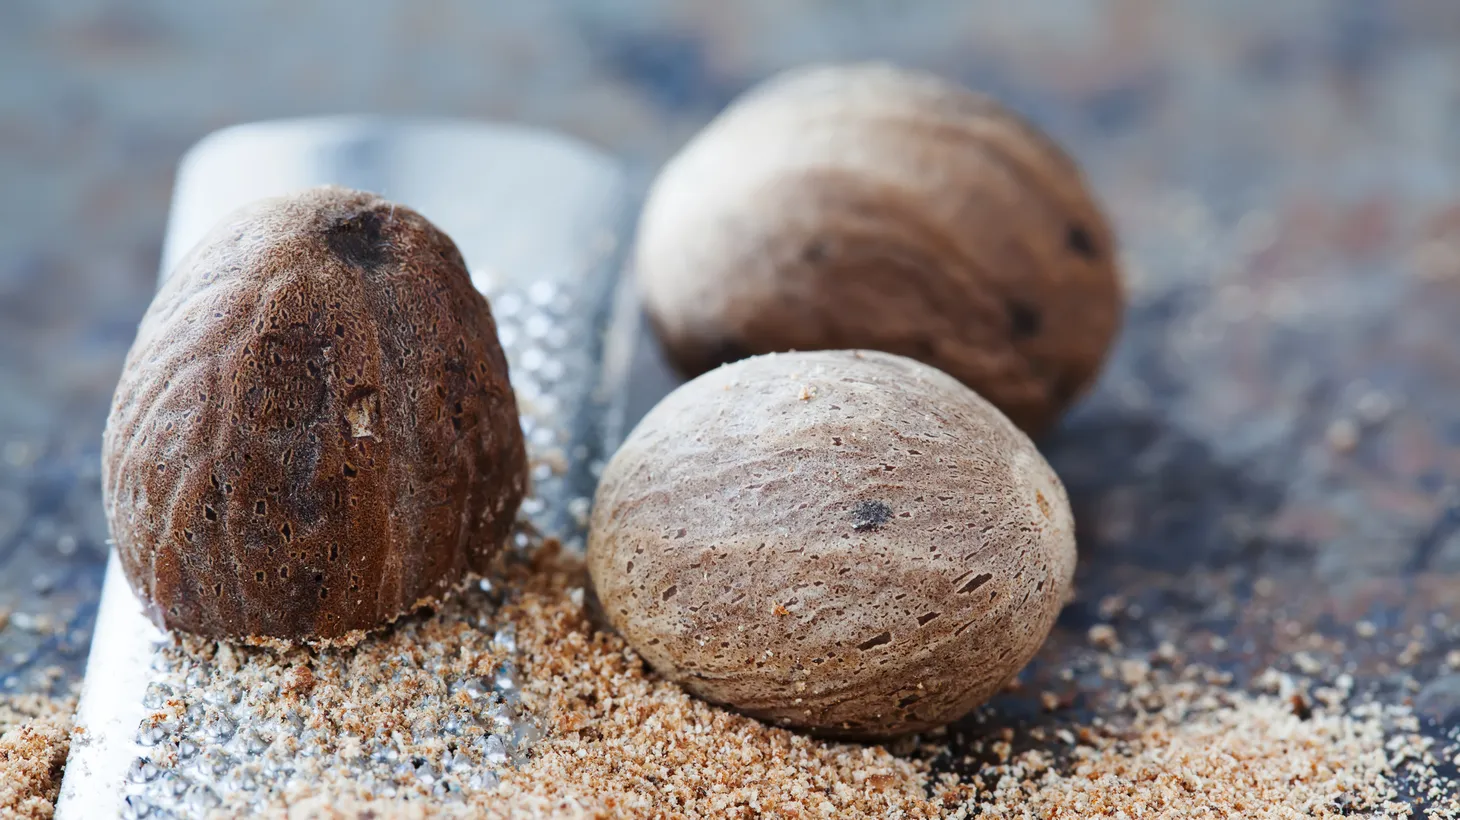 Nutmeg first grew on 10 remote islands in Indonesia. Now it’s used among global cuisines in spice blends.